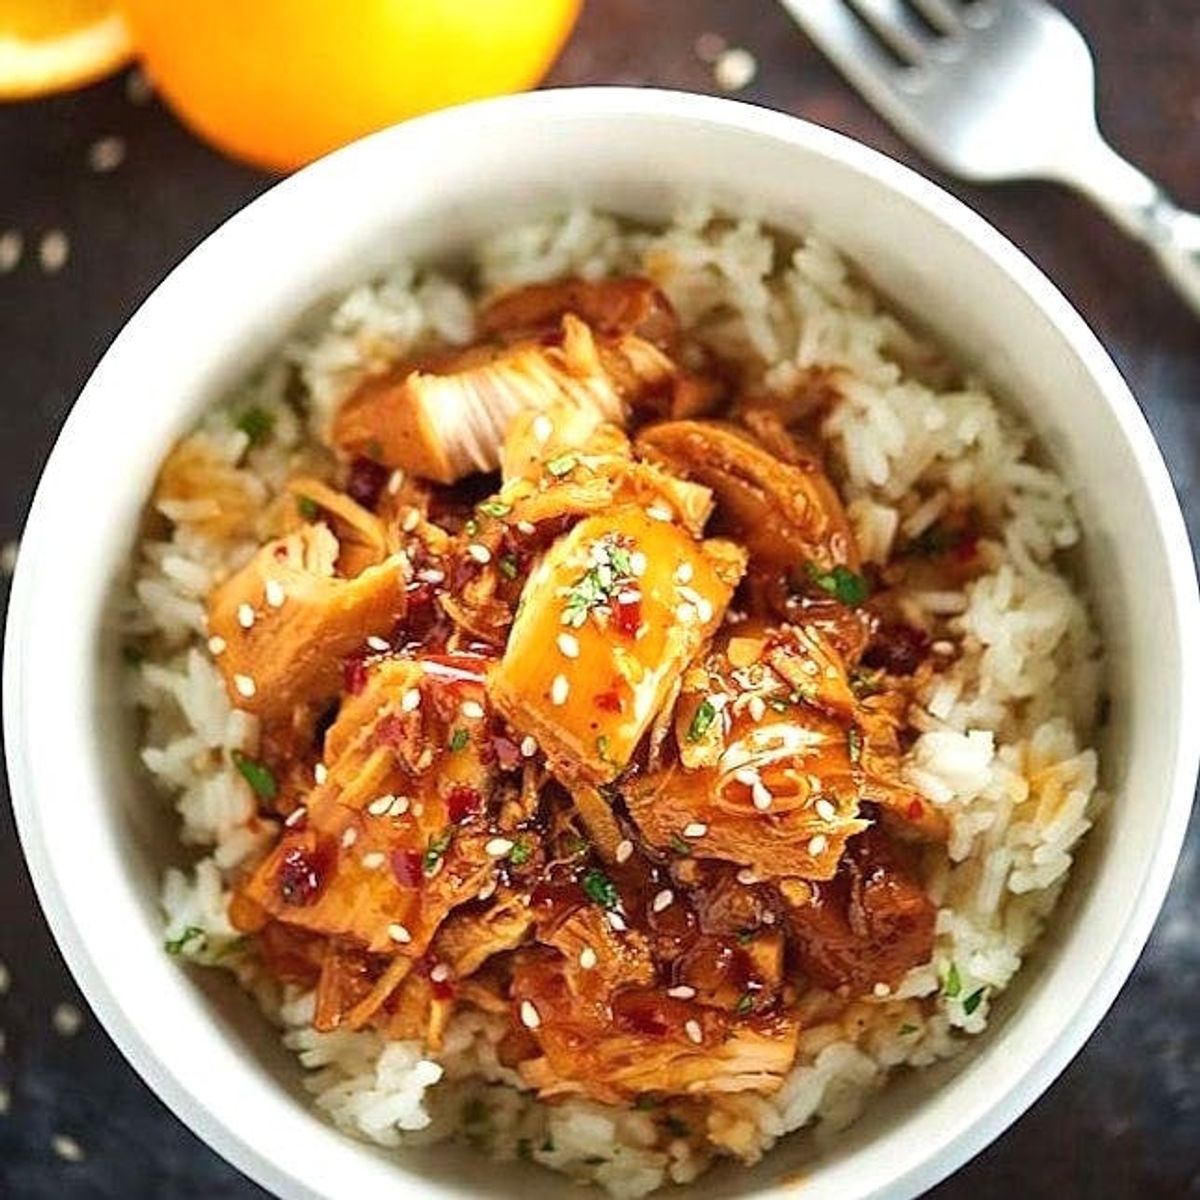 Our 40 healthy crockpot recipes include this slow cooked orange chicken over rice